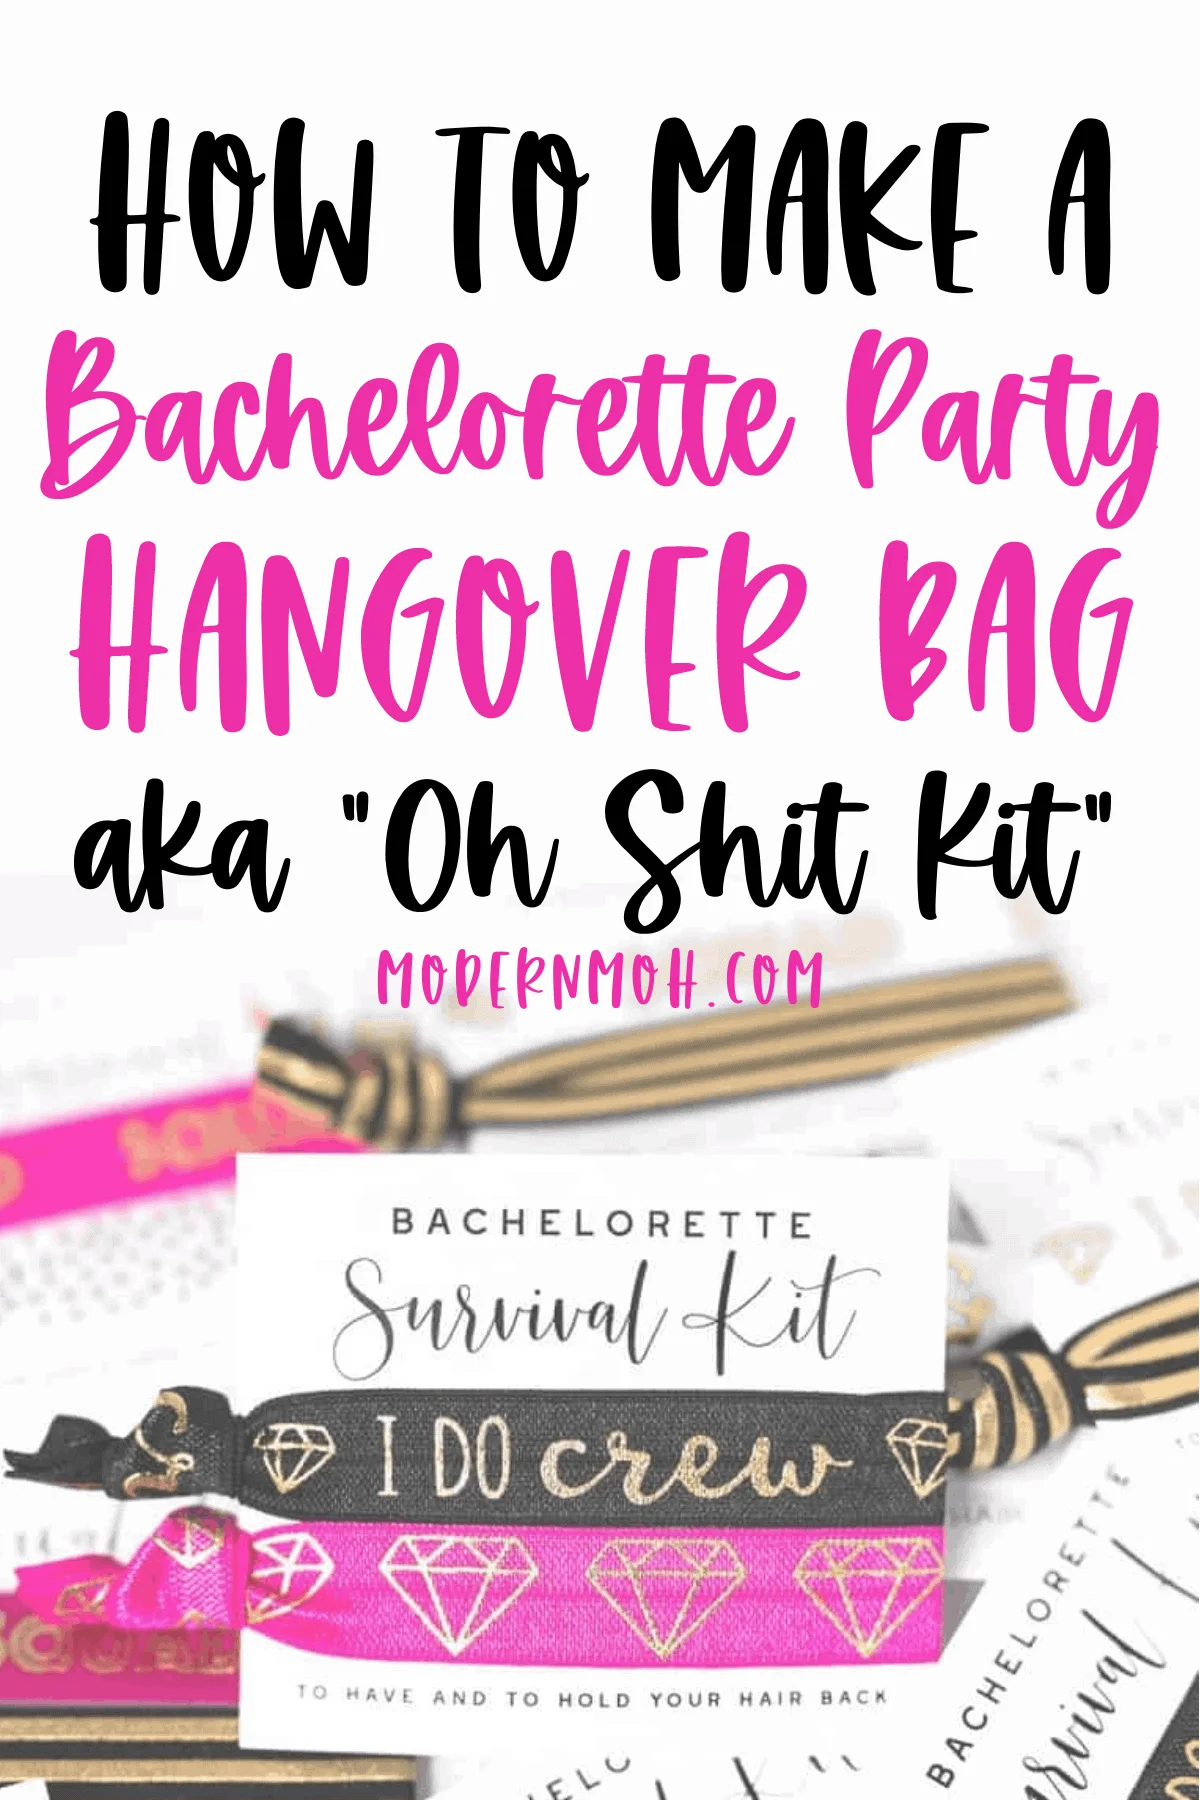 How to Build a Bachelorette Survival Kit (Oh Shit Kit)